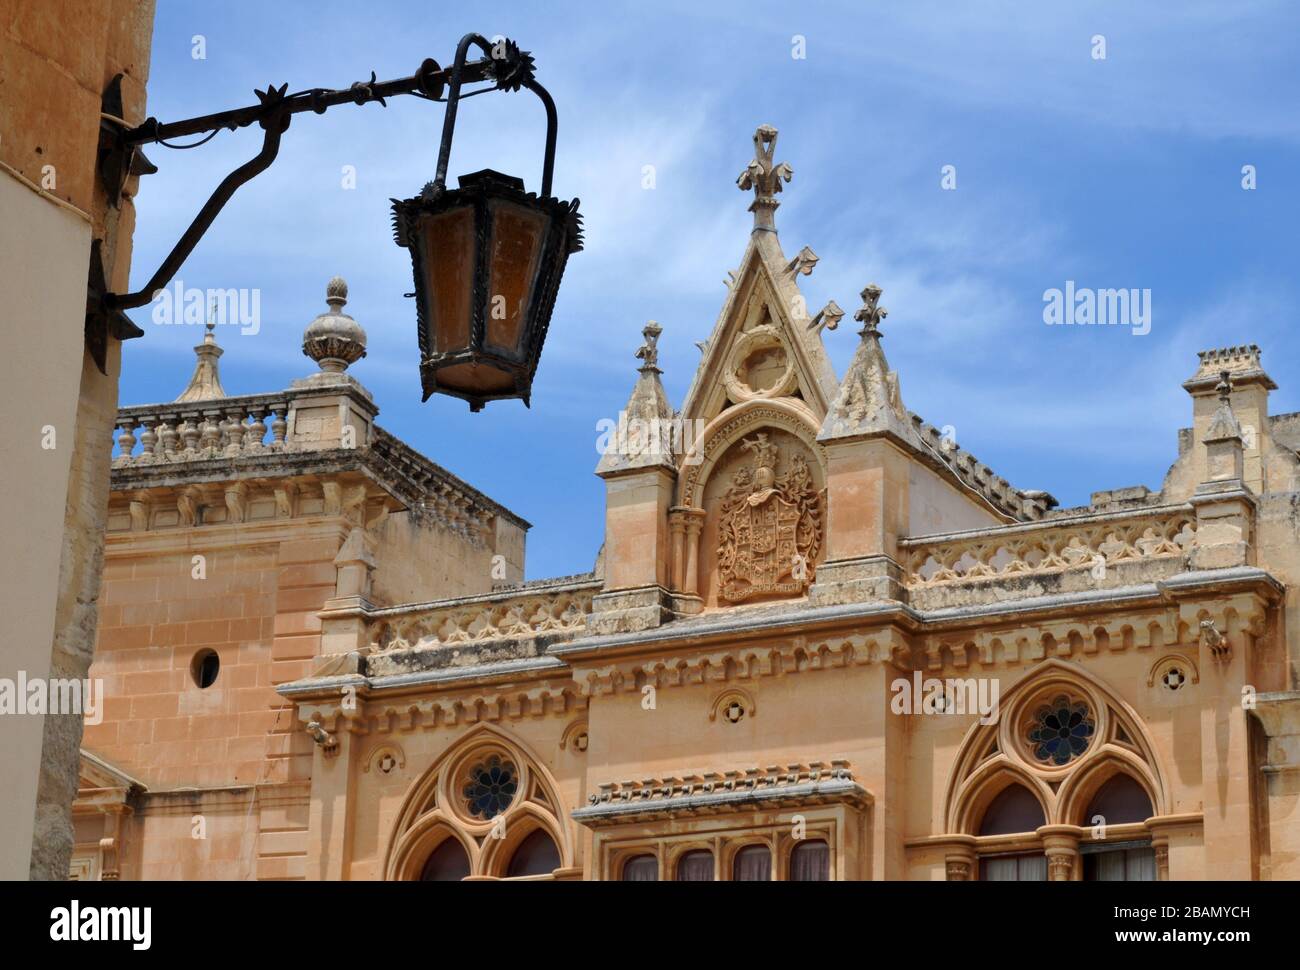 Detail of the elaborate roofline on a building in St. Paul's Square, at the heart of the historic walled city of Mdina, Malta. Stock Photo